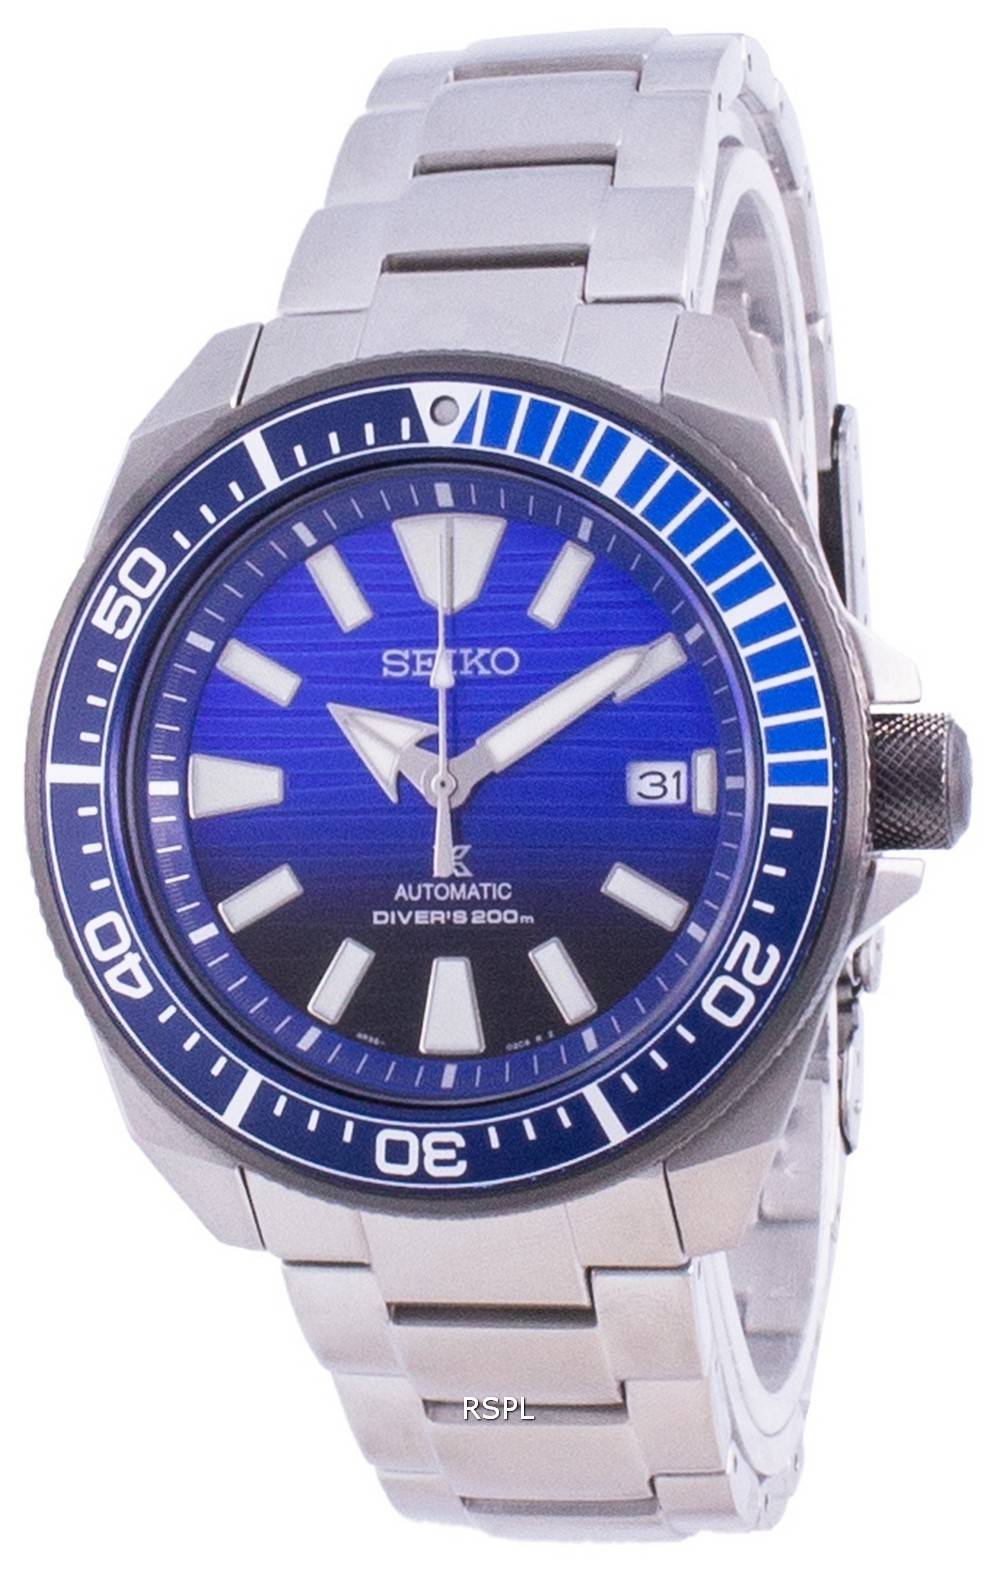 Seiko Prospex The Ocean Special Automatic SRPC93K SRPC93K1 SRPC93K 200M Mens Watch - ZetaWatches